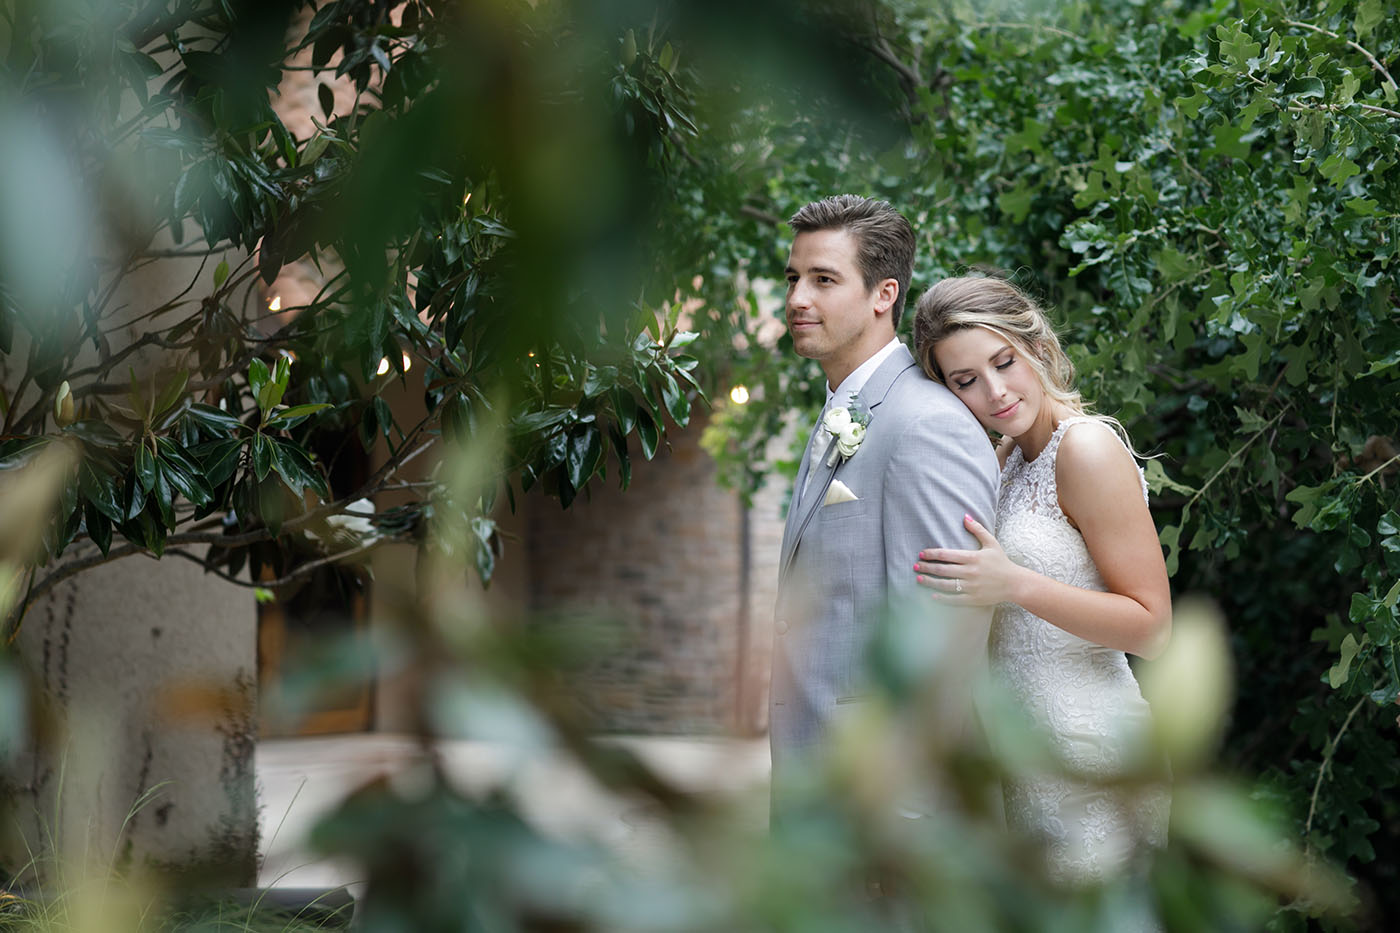 DFW Wedding Planners: A Stylish Soiree | Natalie + John at Aristide in Mansfield